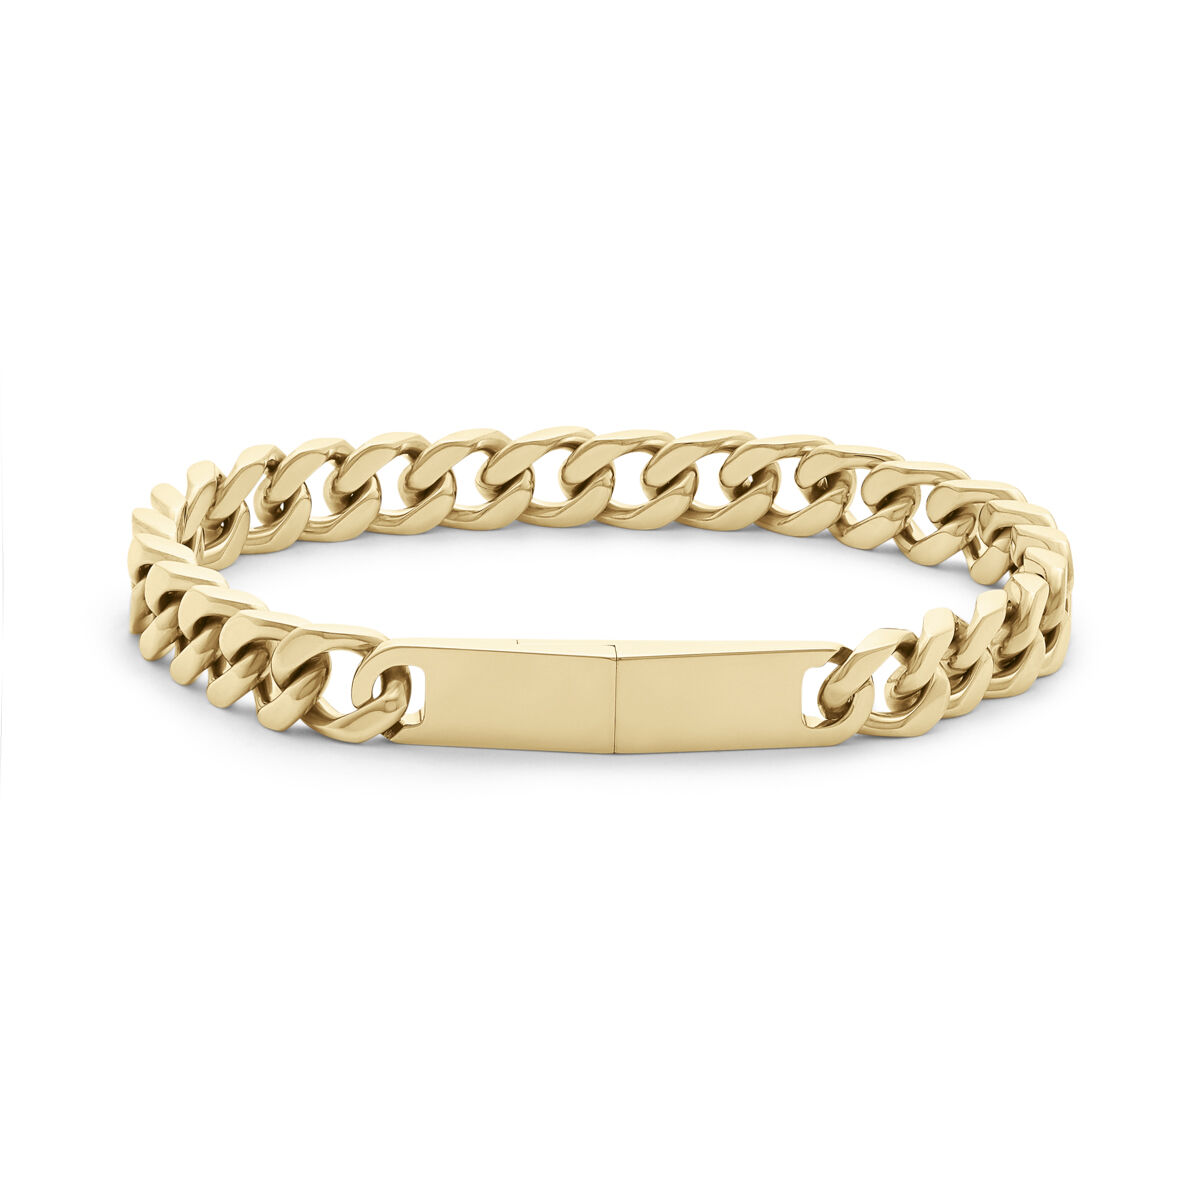 Modern or traditional, we have your style of bracelets #22ktgold #bracelets  #modernstyle #tradit… | Gold jewelry fashion, Gold earrings designs, Gold  bangles design